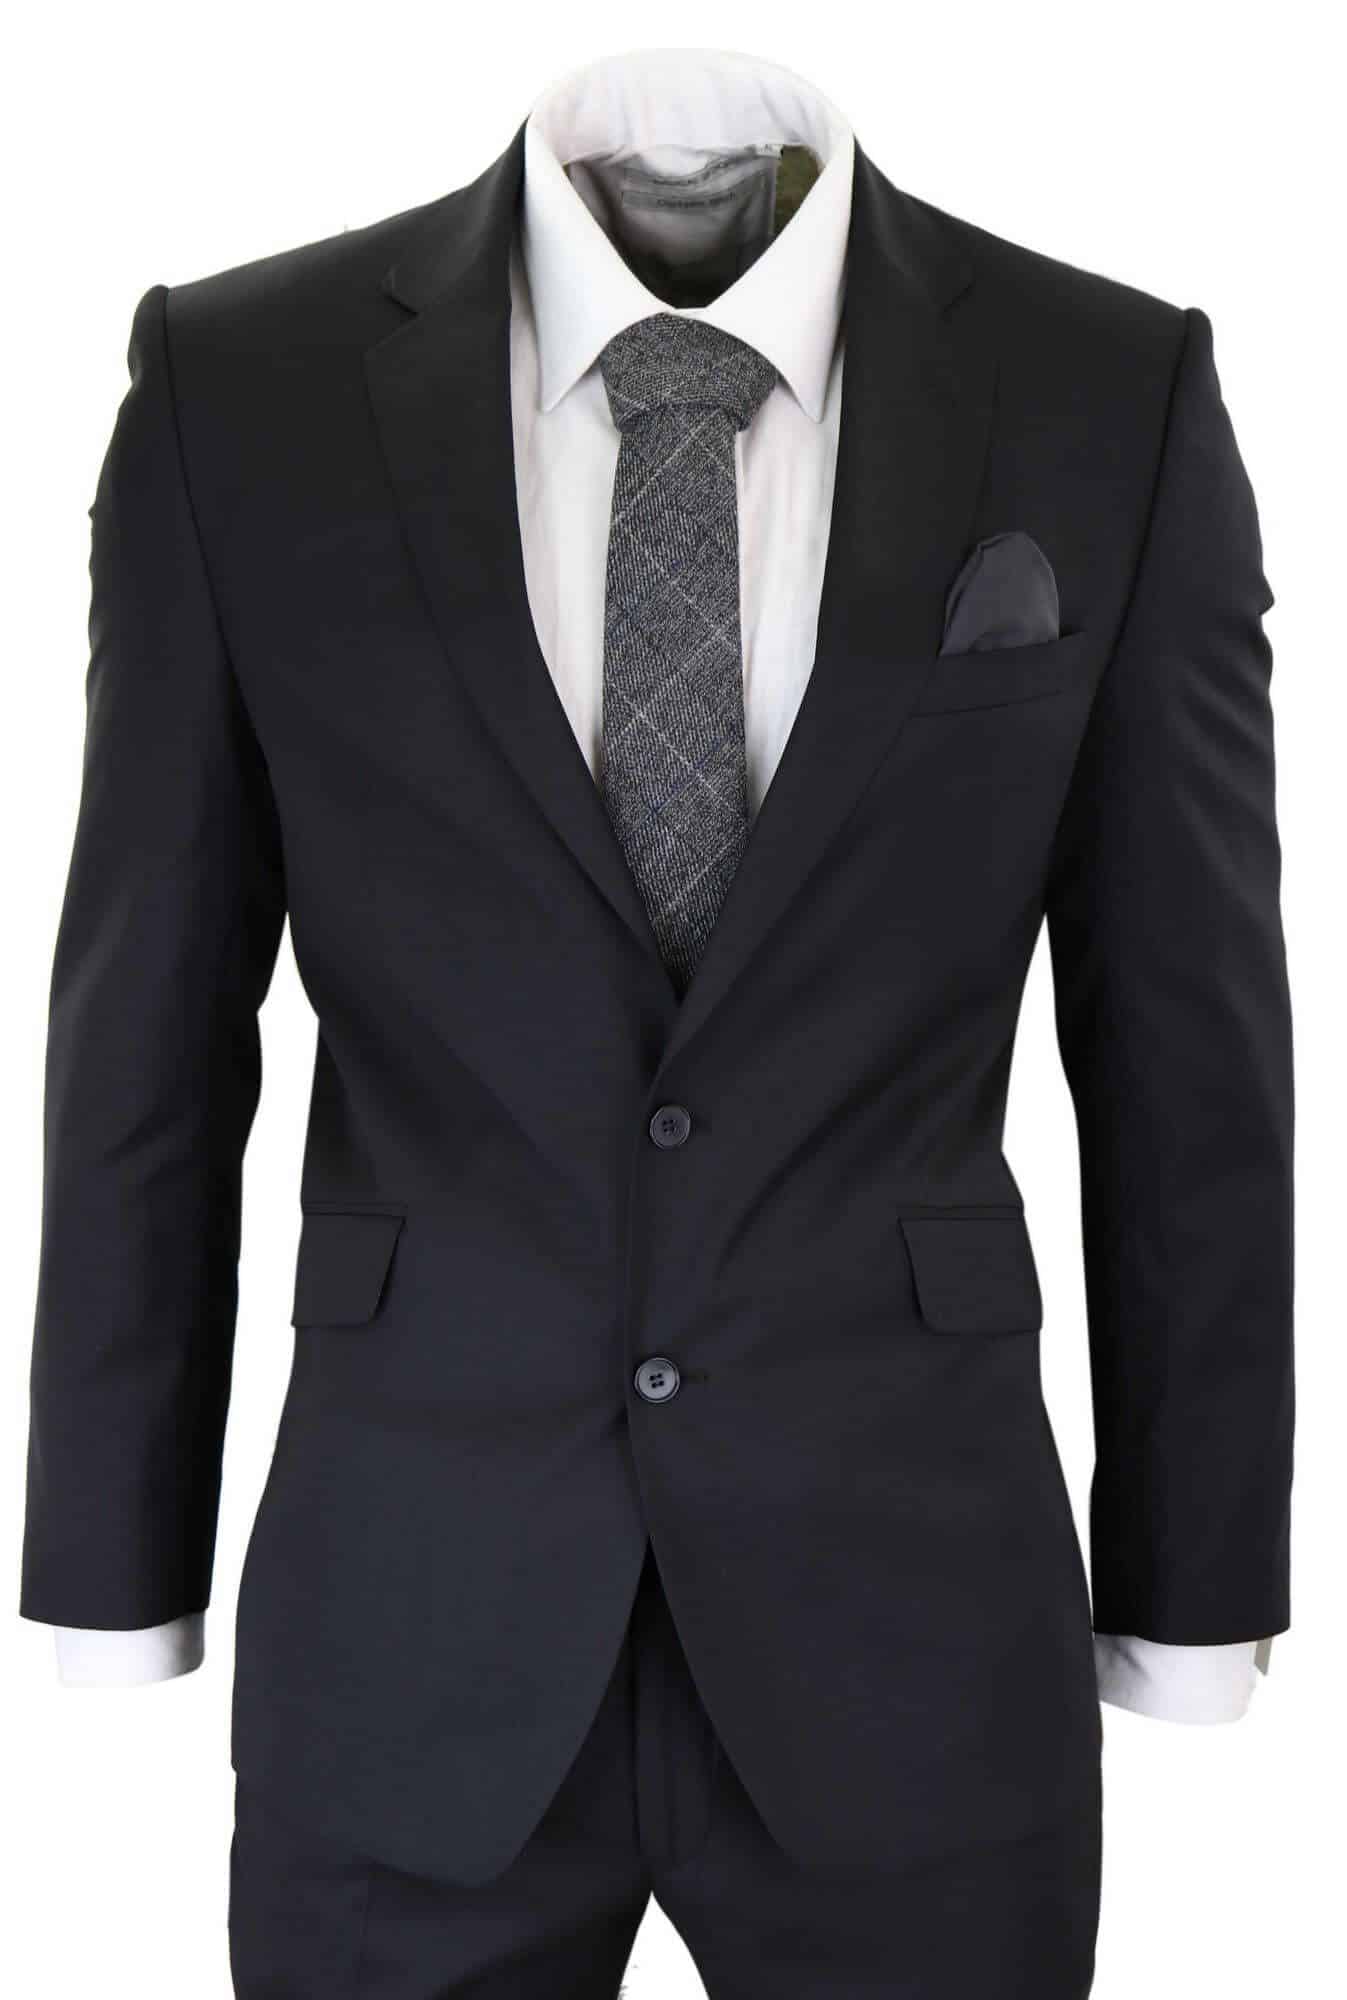 Mens Suits For Prom 55 Marvelous Prom Suits For Men Step Out In